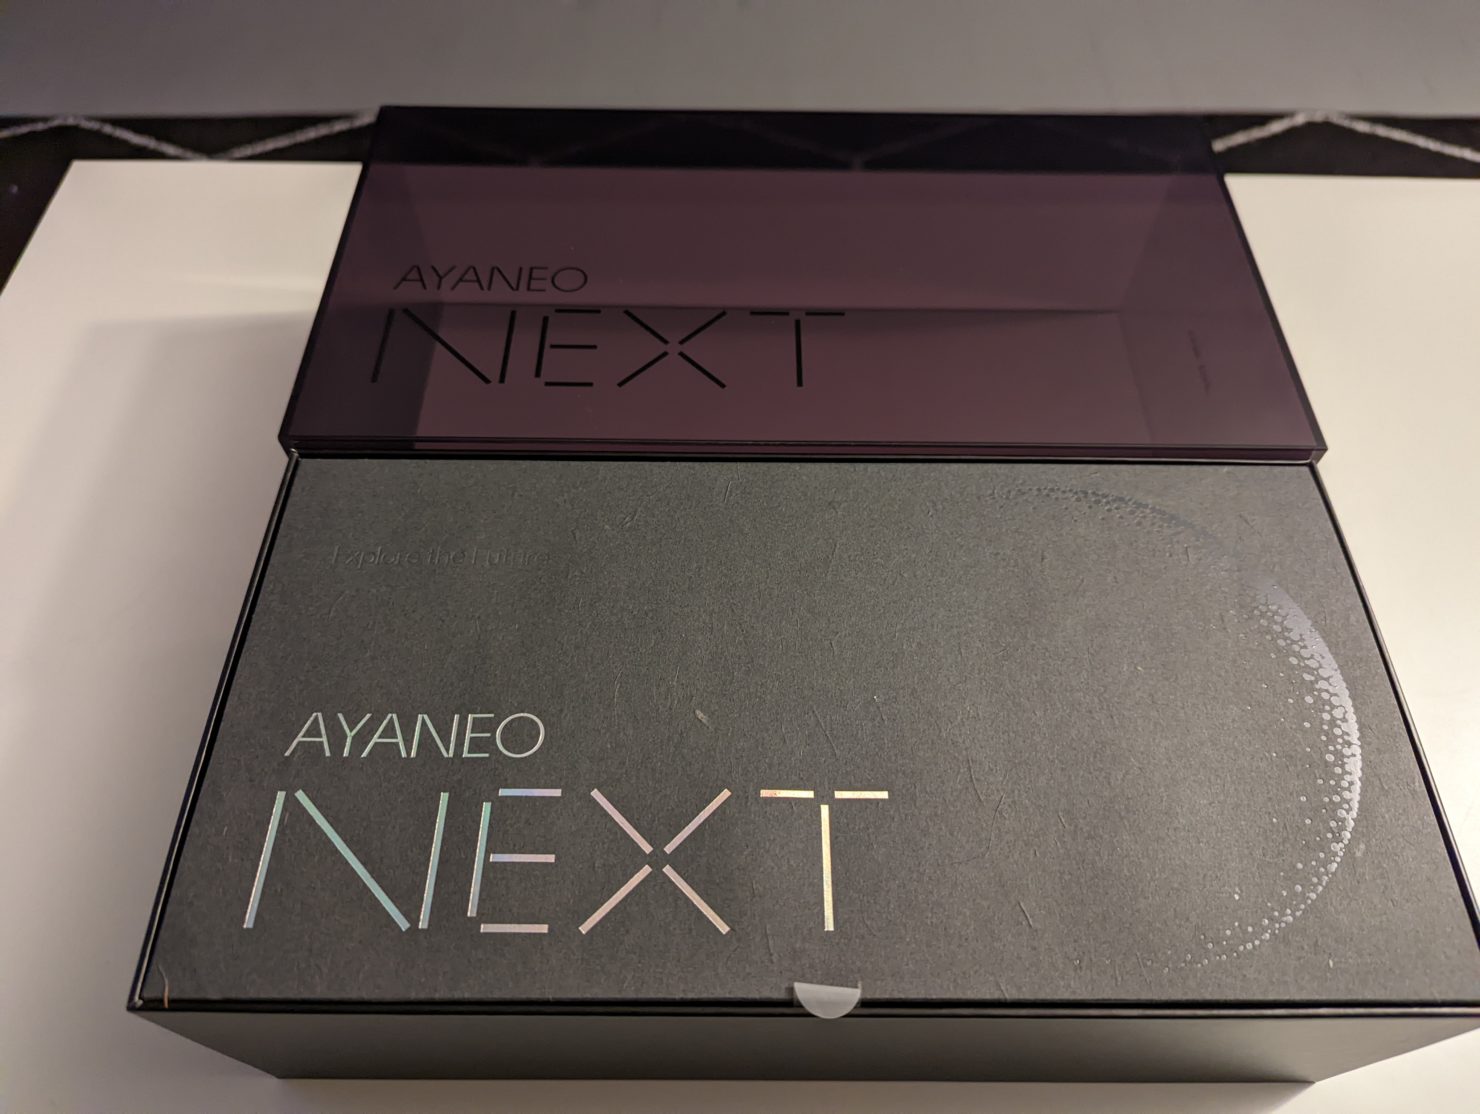 The first step in unboxing AYANEO NEXT